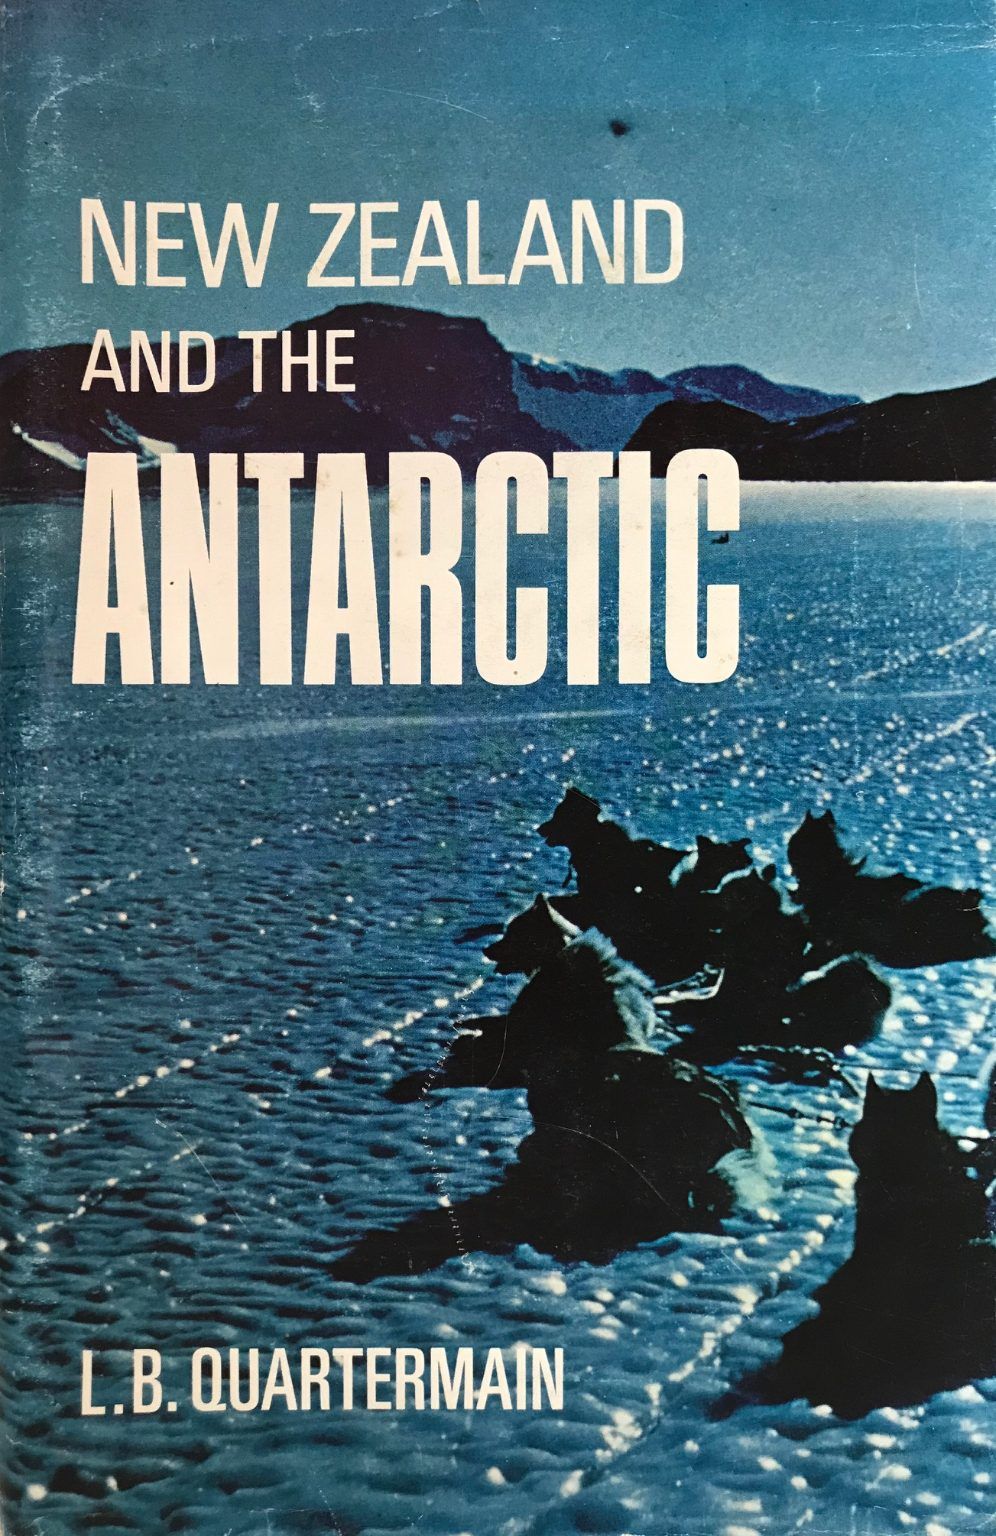 NEW ZEALAND AND THE ANTARCTIC